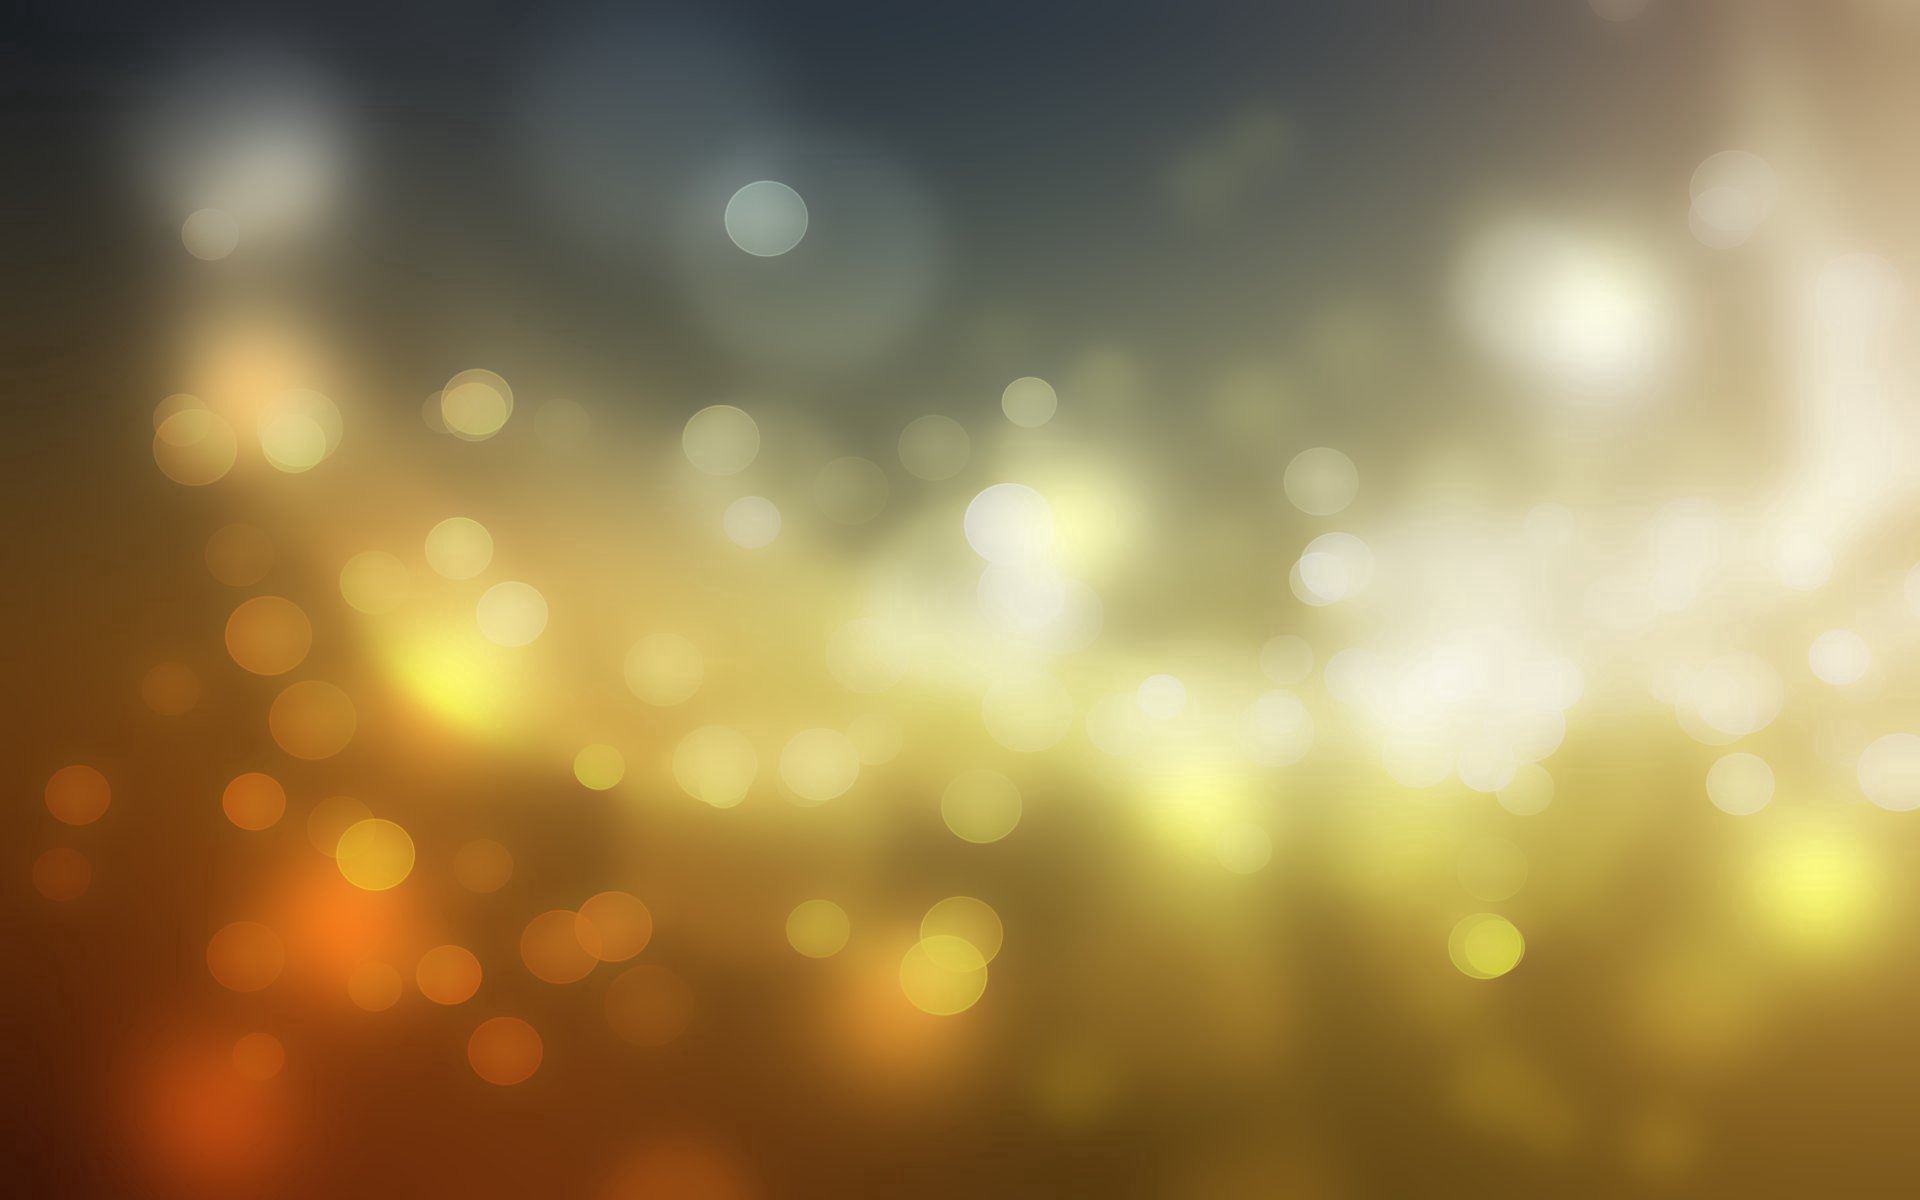 HD desktop wallpaper: Shine, Light, Points, Glare, Bright, Point, Abstract  download free picture #93609